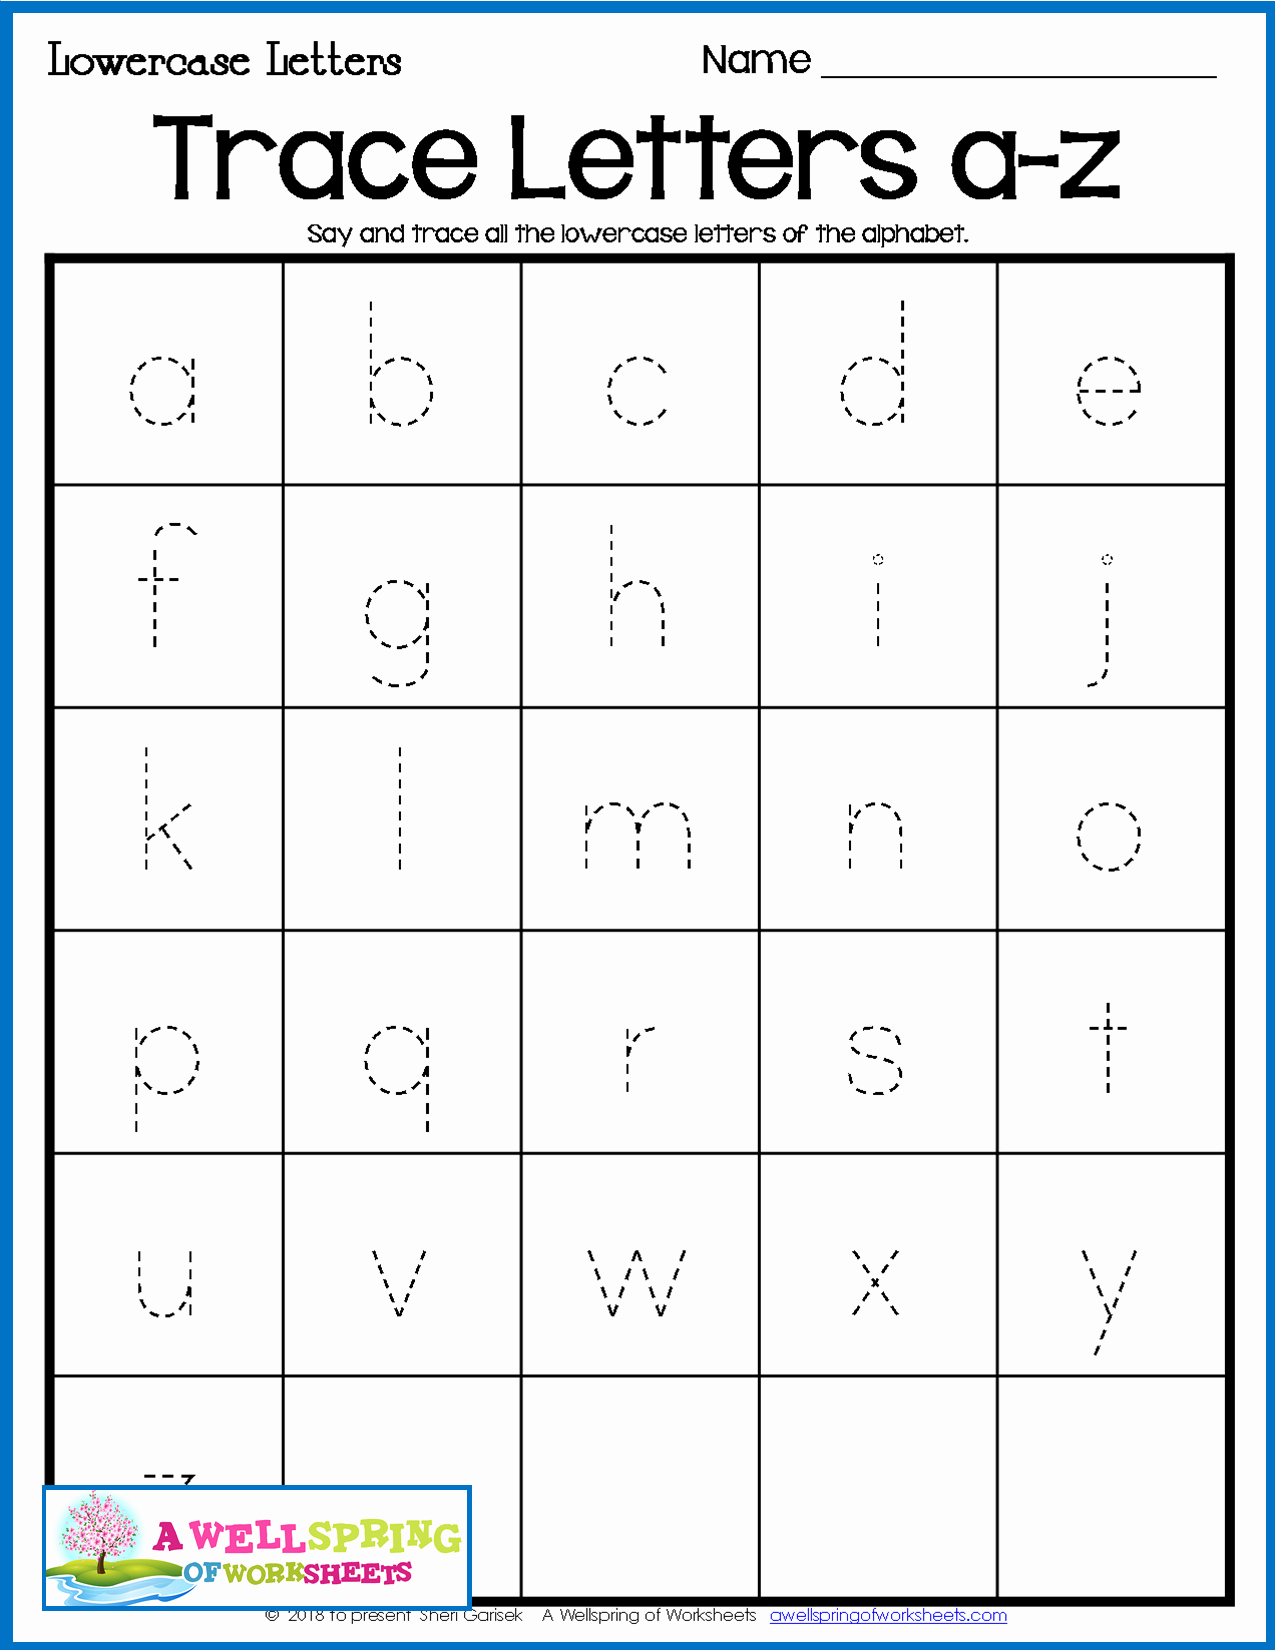 Kindergarten Lowercase Letters Worksheets Awesome Free Printable Tracing Lowercase Letters